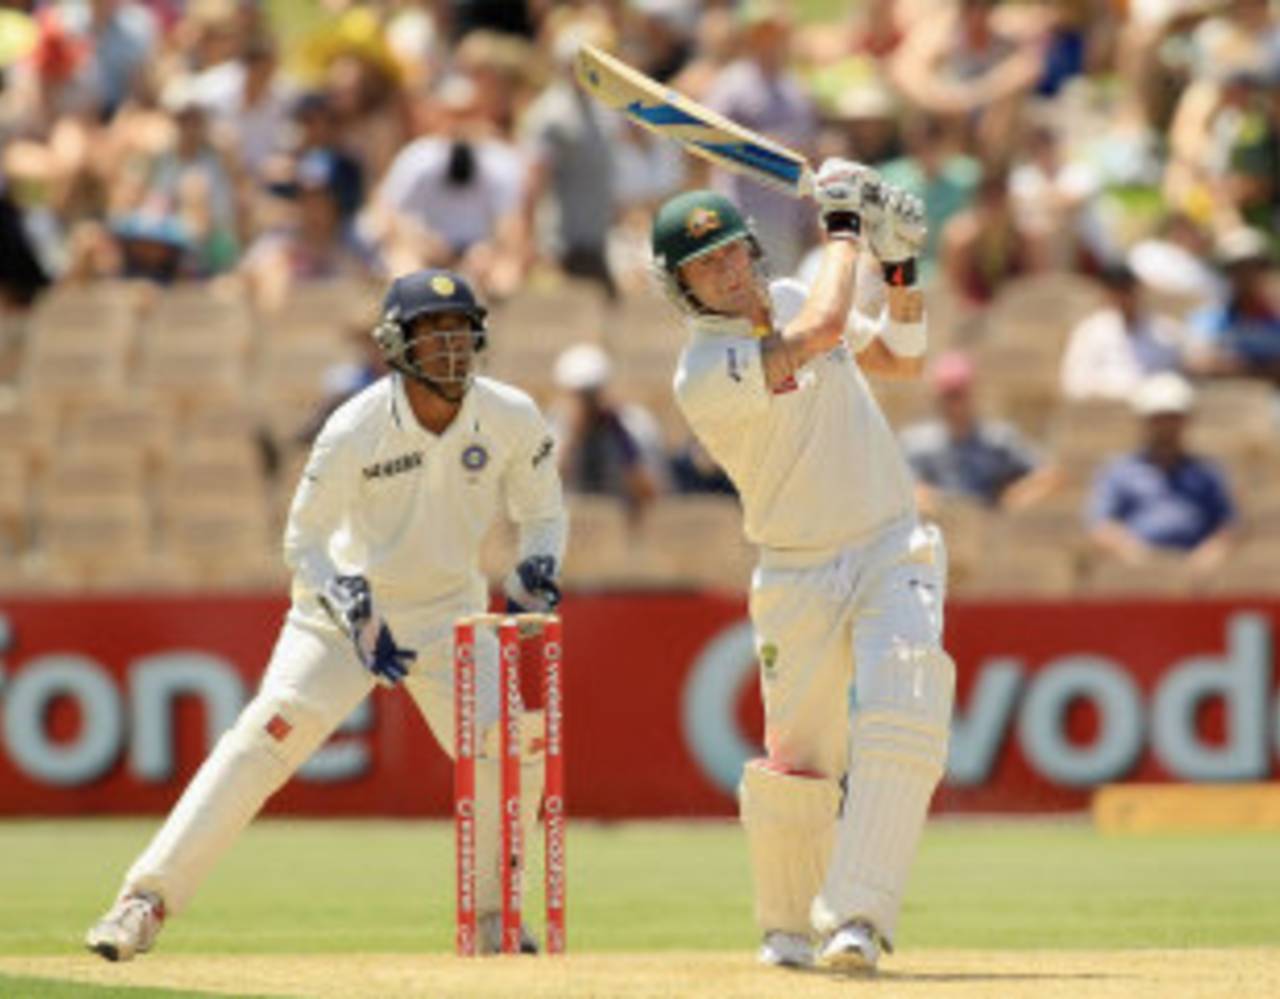 Michael Clarke played another solid innings, Australia v India, 4th Test, Adelaide, 1st day, January 24, 2012